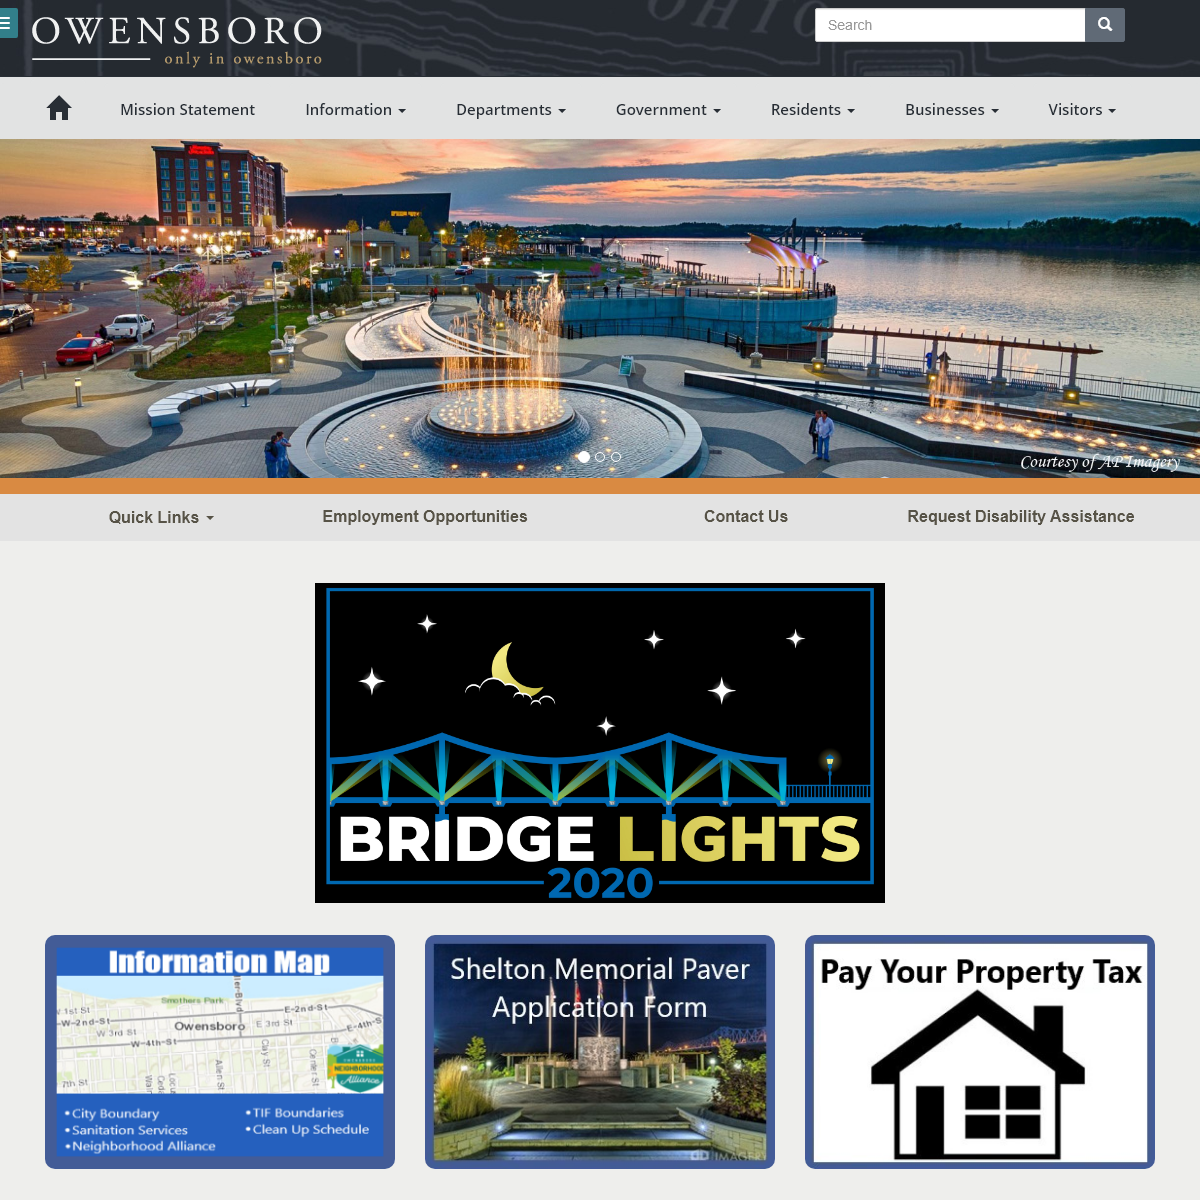 A complete backup of owensboro.org